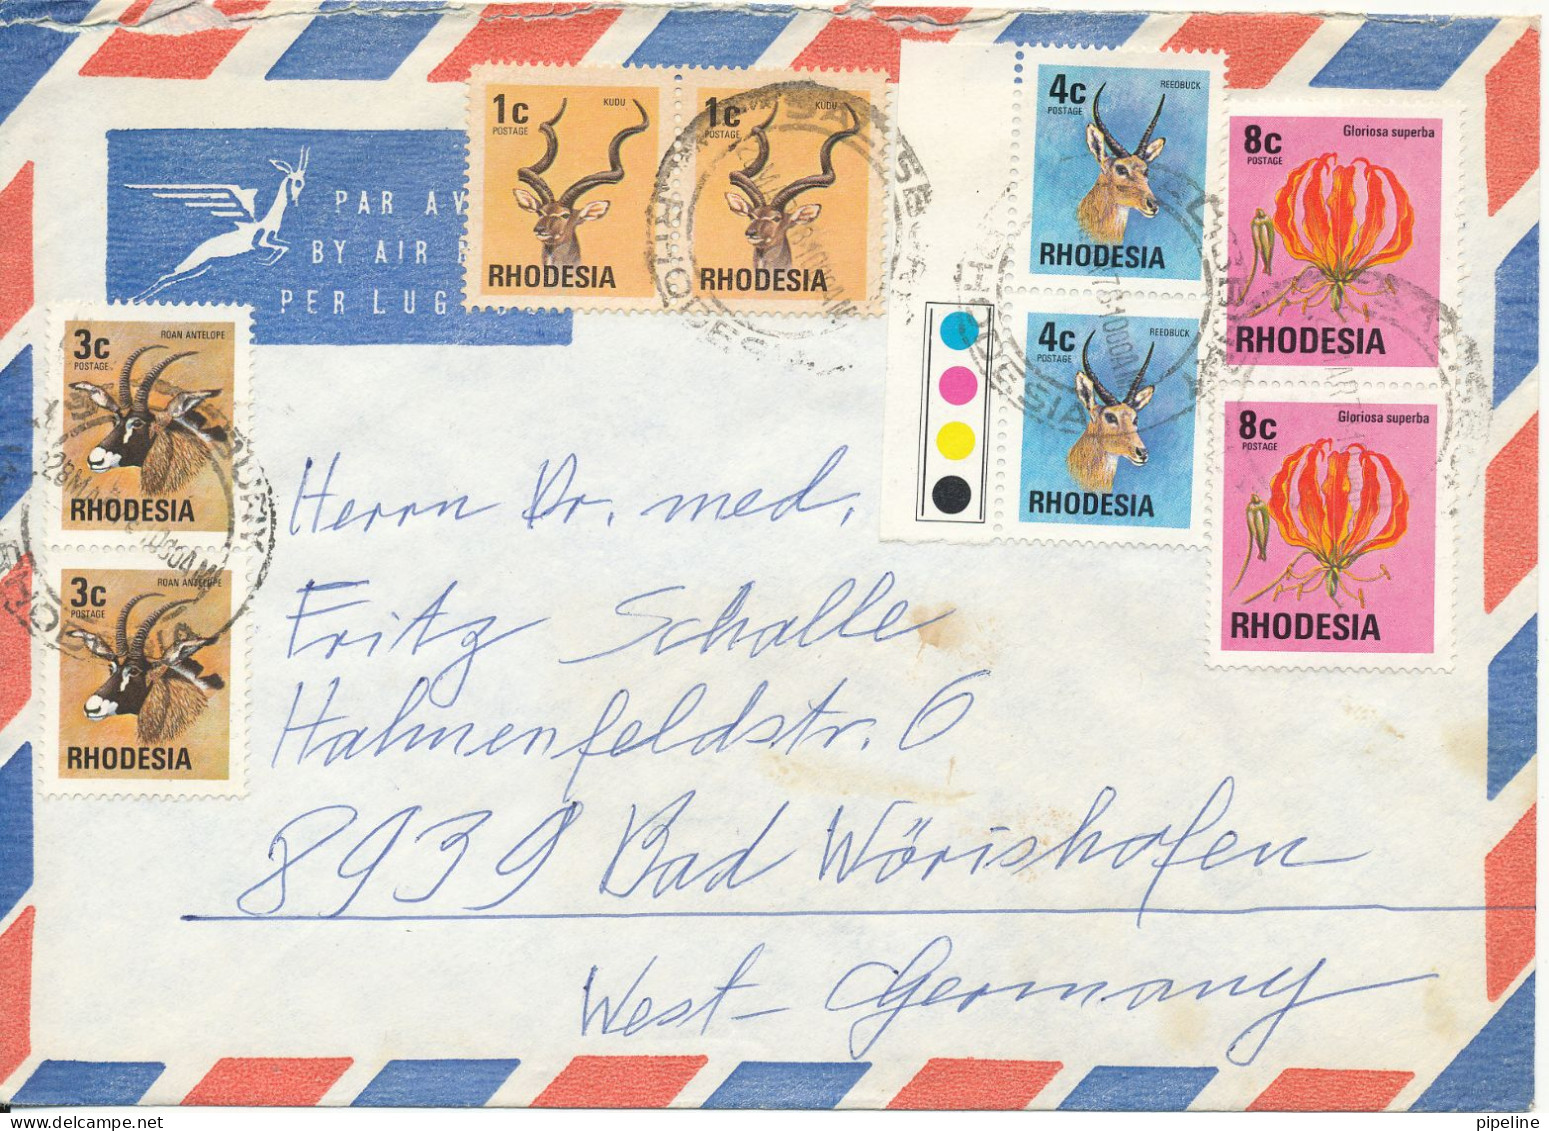 Rhodesia Air Mail Cover Sent To Germany 28-3-1976 With More Topiuc Stamps - Rhodesia (1964-1980)